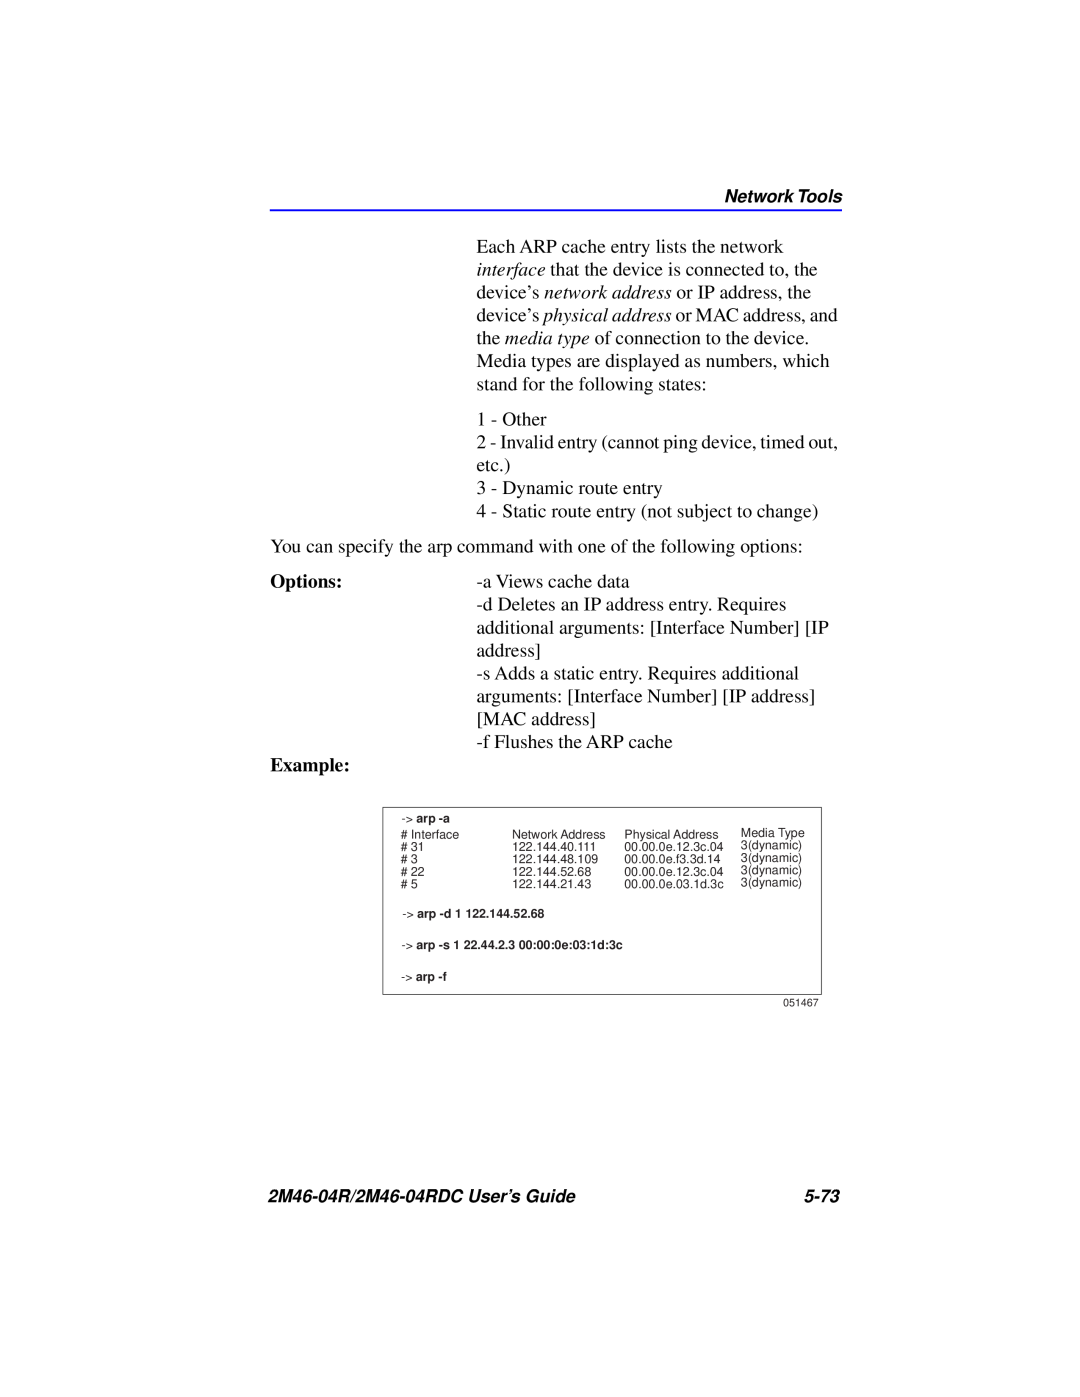 Cabletron Systems pmn manual Other 2 - Invalid entry cannot ping device, timed out, etc, Options, Example 